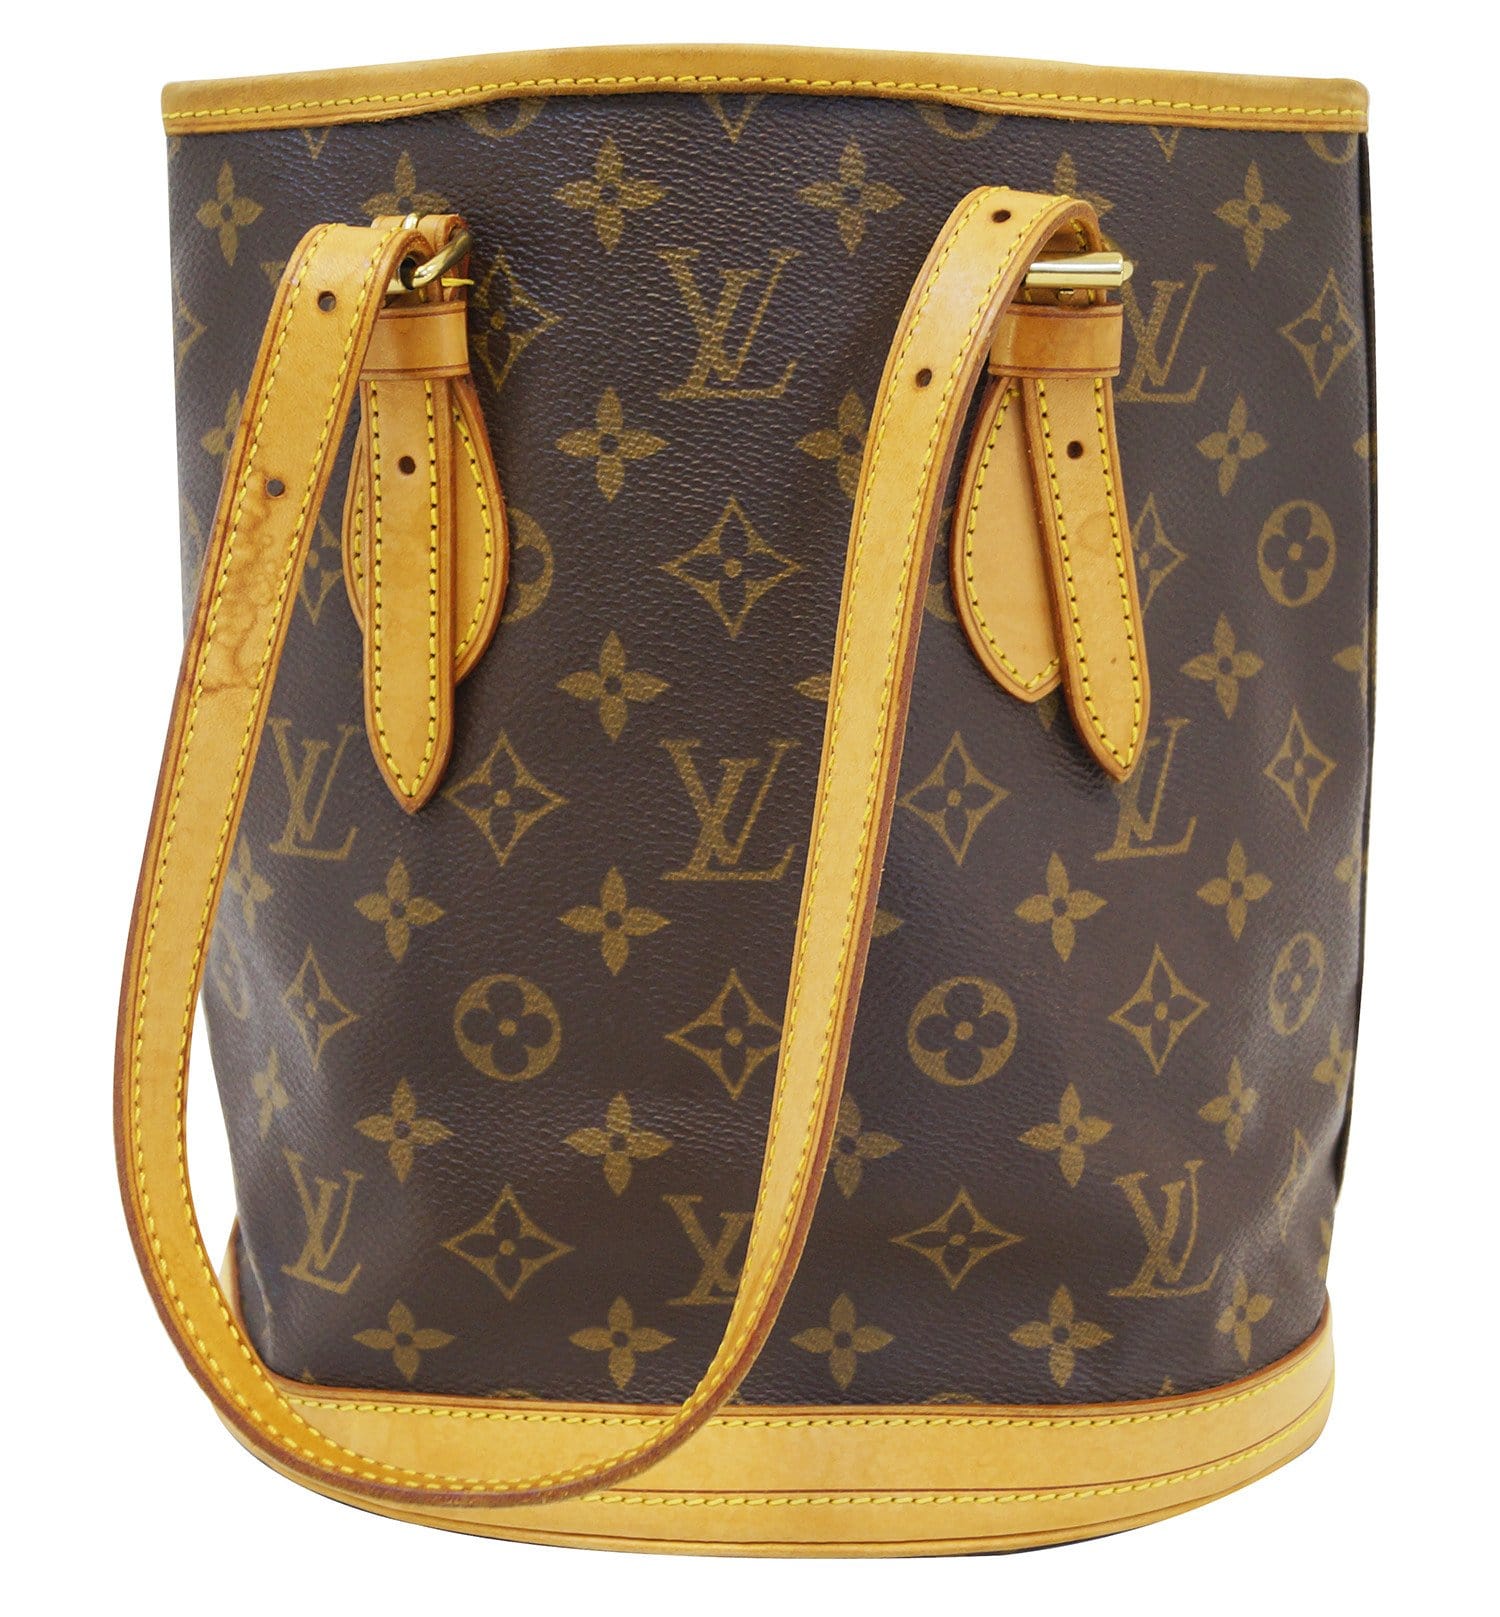 Just in… Louis Vuitton Bucket Bag - WHAT 2 WEAR of SWFL